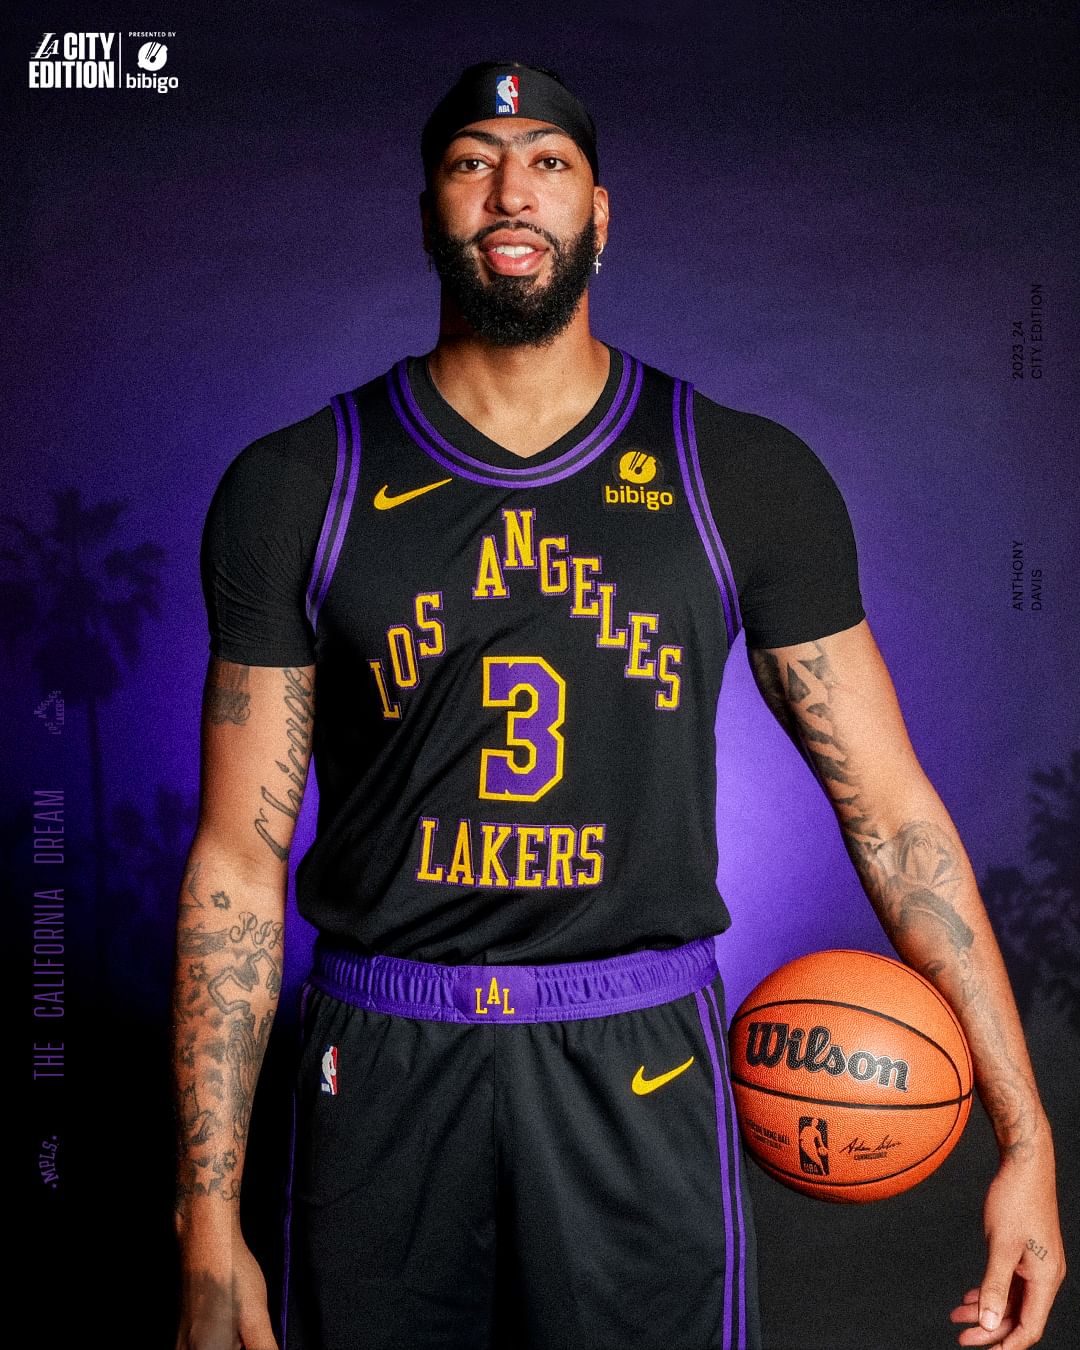 NBA is putting up a significant effort into its City Edition push, which includes the release of Los Angeles Lakers City Edition jerseys